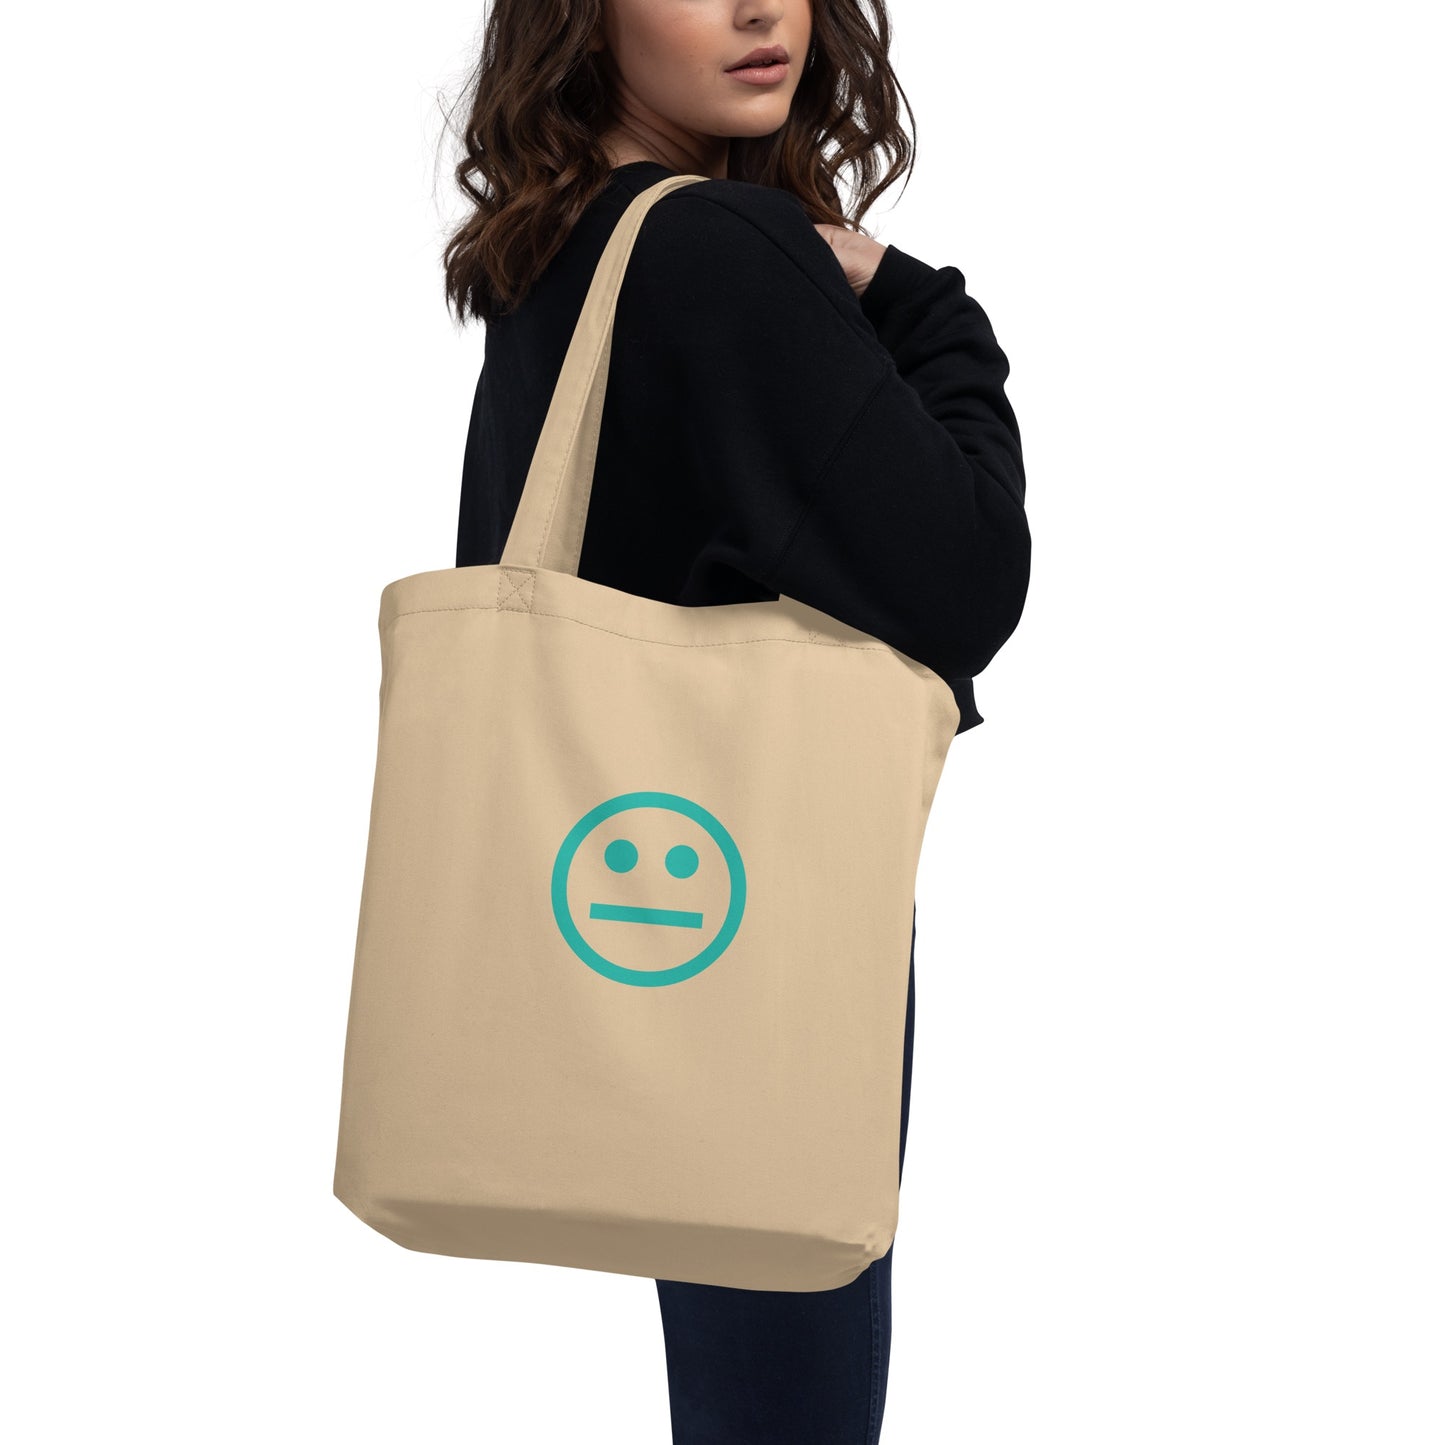 RedHanded Not In This Economy Tote Bag